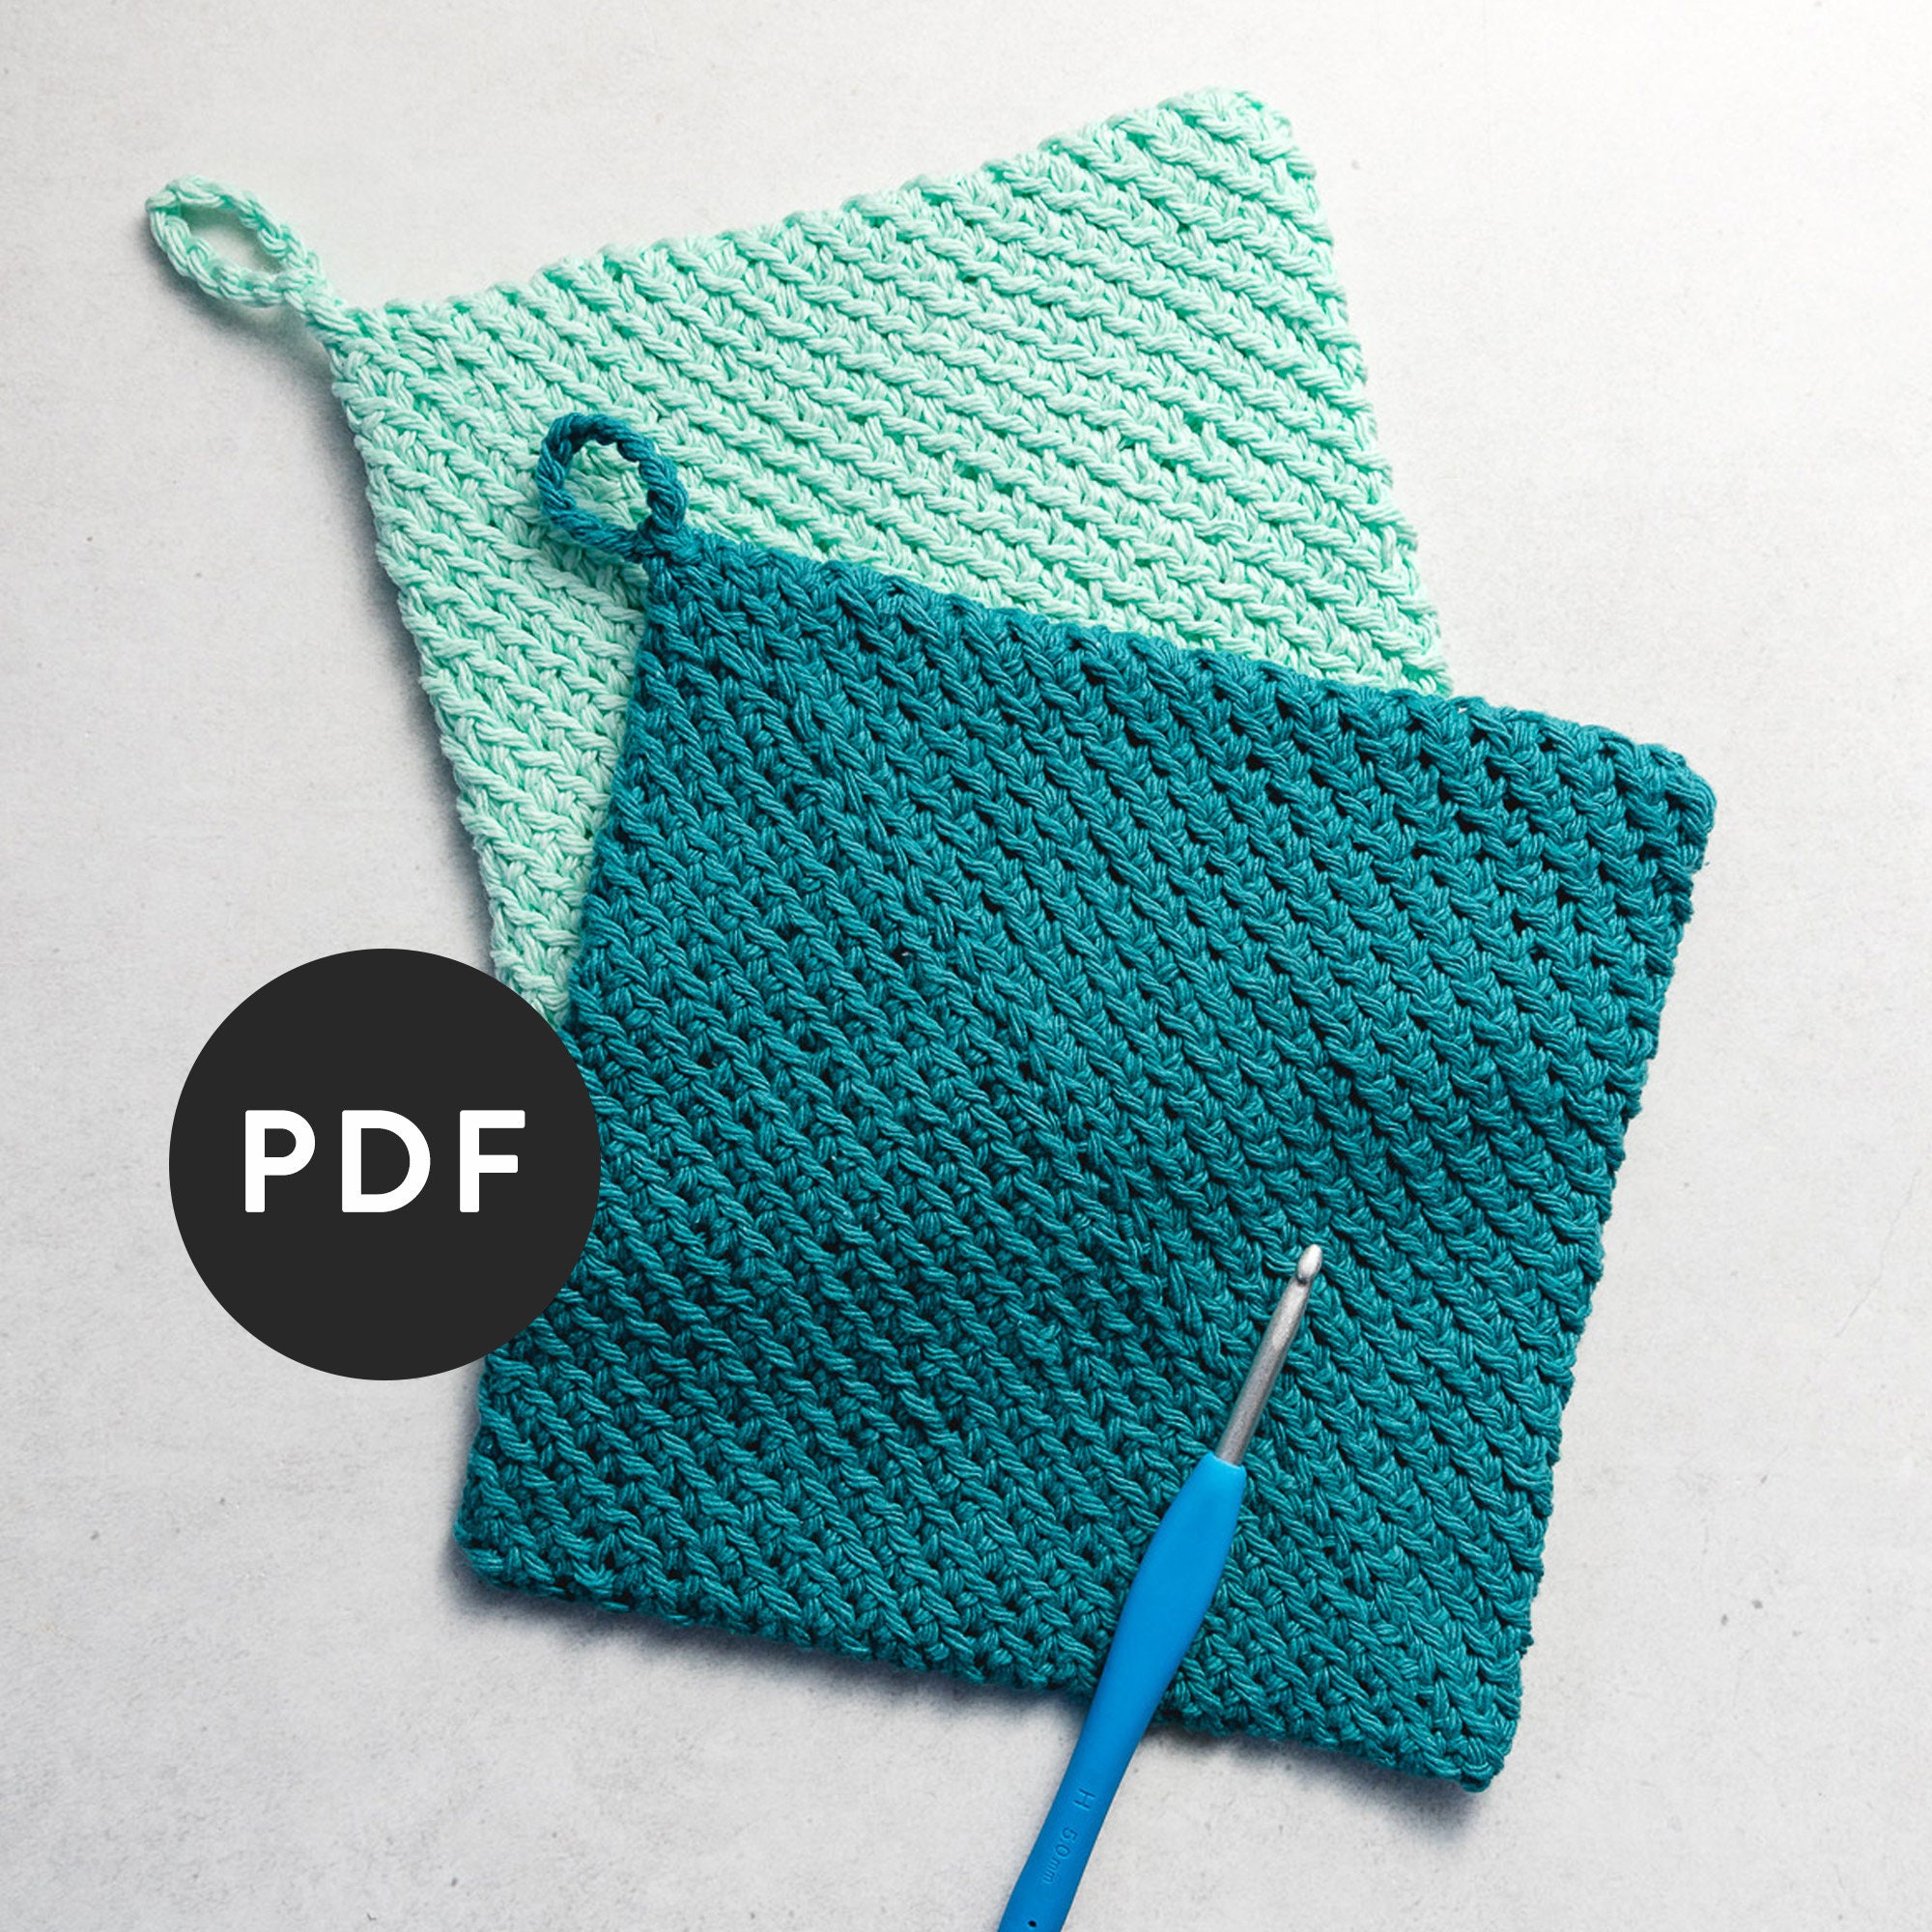 How to Crochet a Blanket + Free Pattern - Sarah Maker